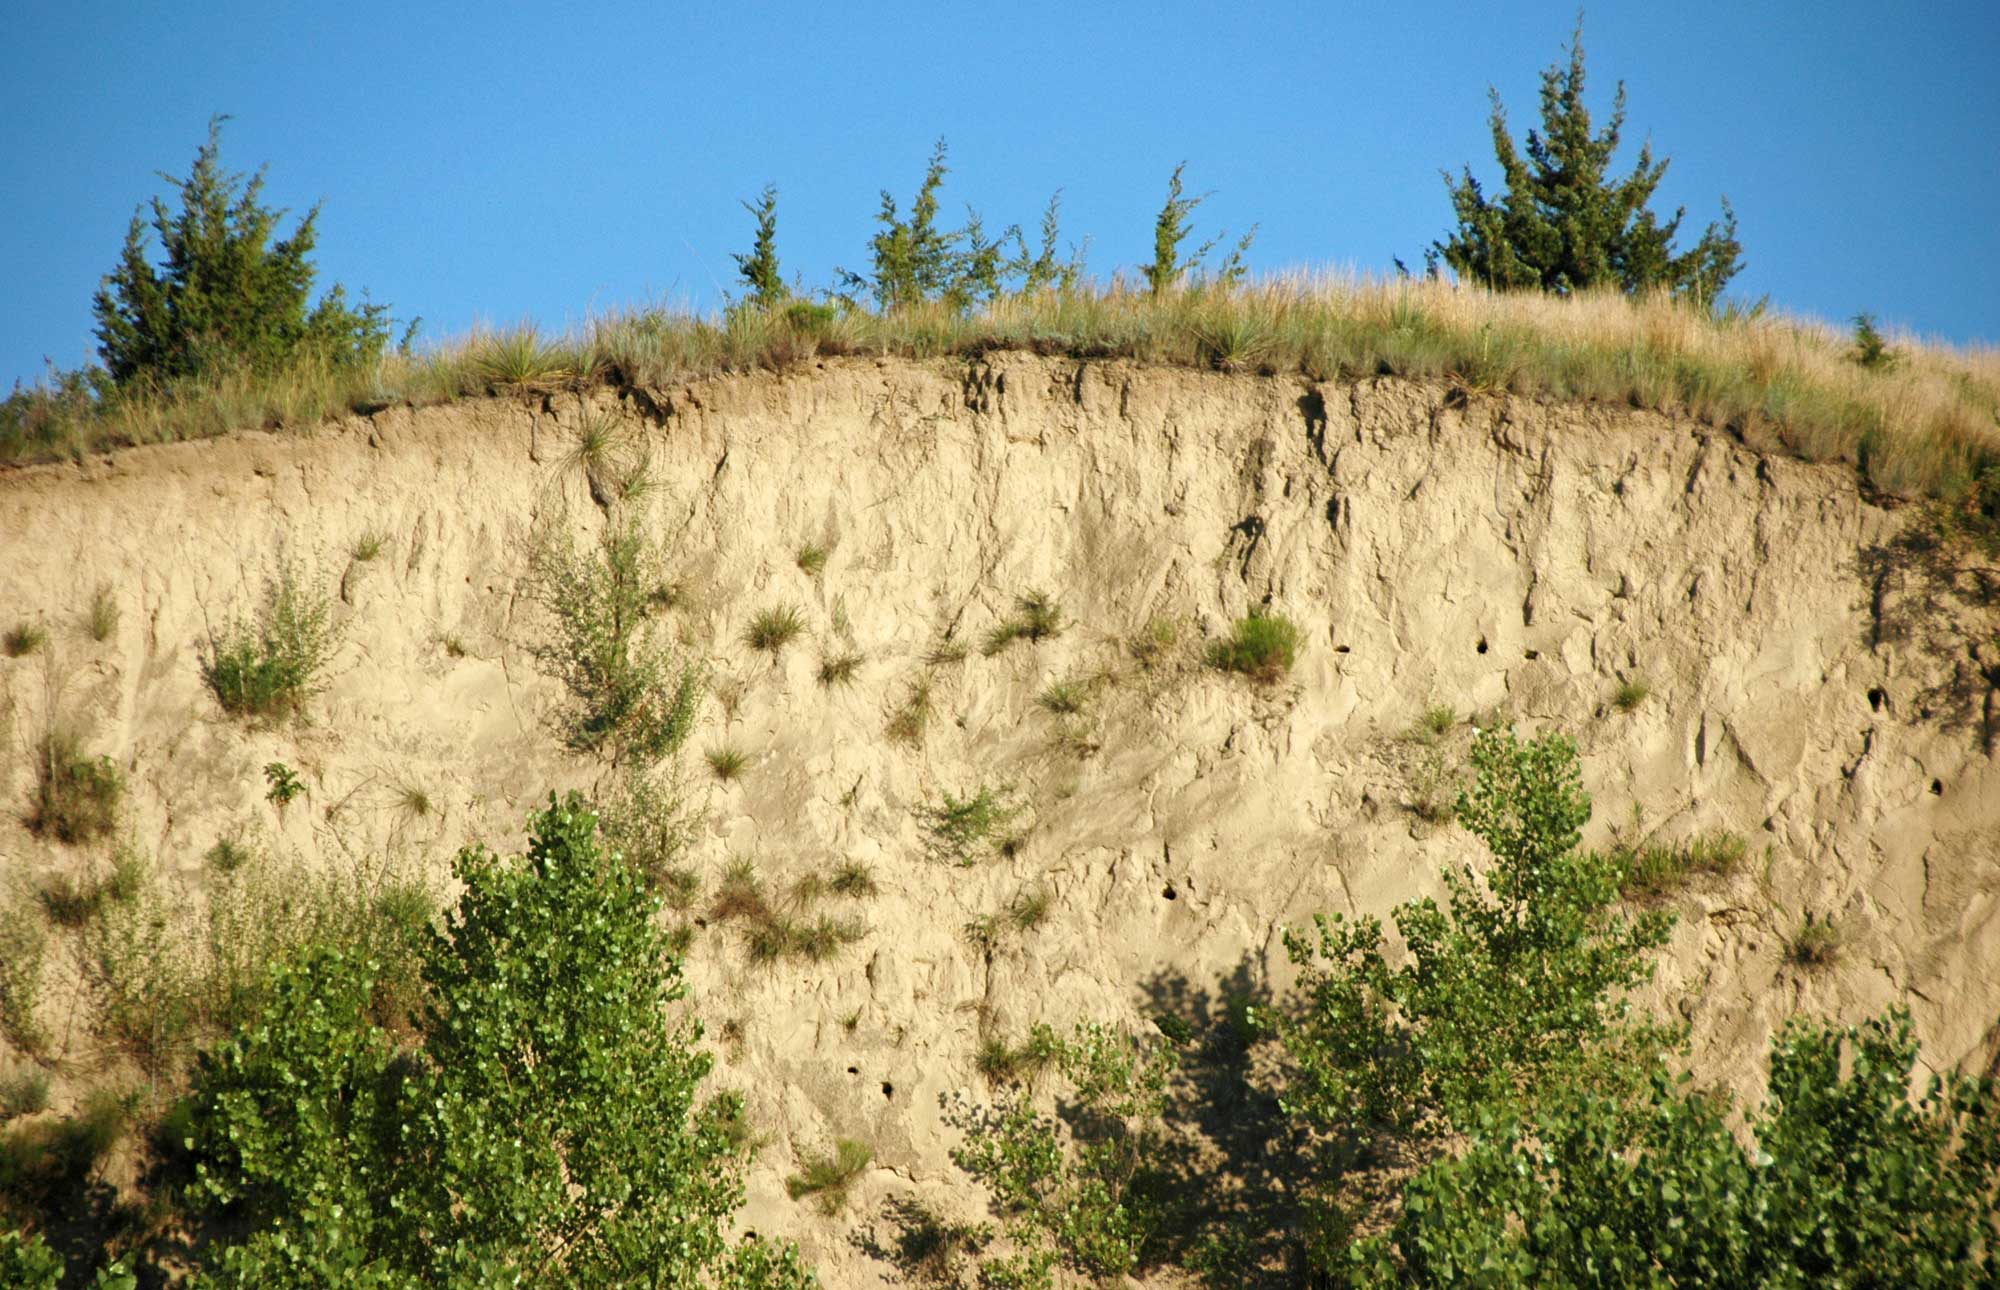 Photograph of an exposure of Peoria Loess in Nebraska. The photo shows a bank made up of beige, fine-grained sediment that has been cut, perhaps by a road, canal, or river. The top part of the bank is covered in grass with some trees. The tops of trees, maybe cottonwoods, can also be seen at the base of the bank.